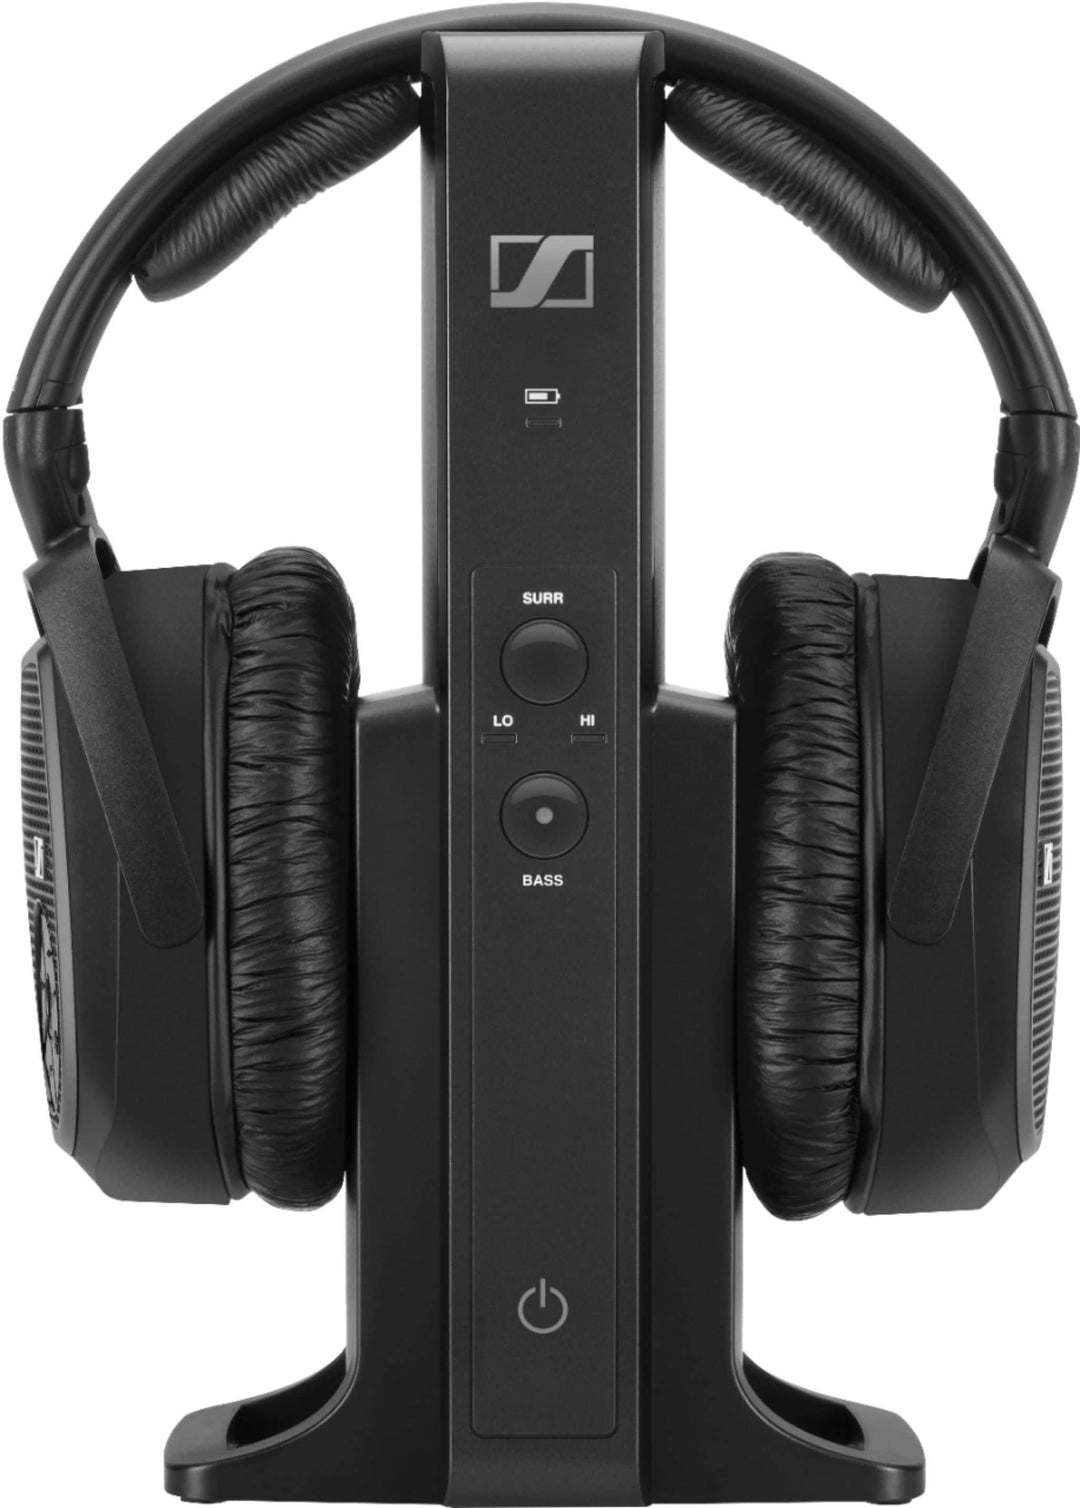 Sennheiser - RS 175 RF Wireless Headphone System for TV Listening with Bass Boost and Surround Sound Modes - Black_2